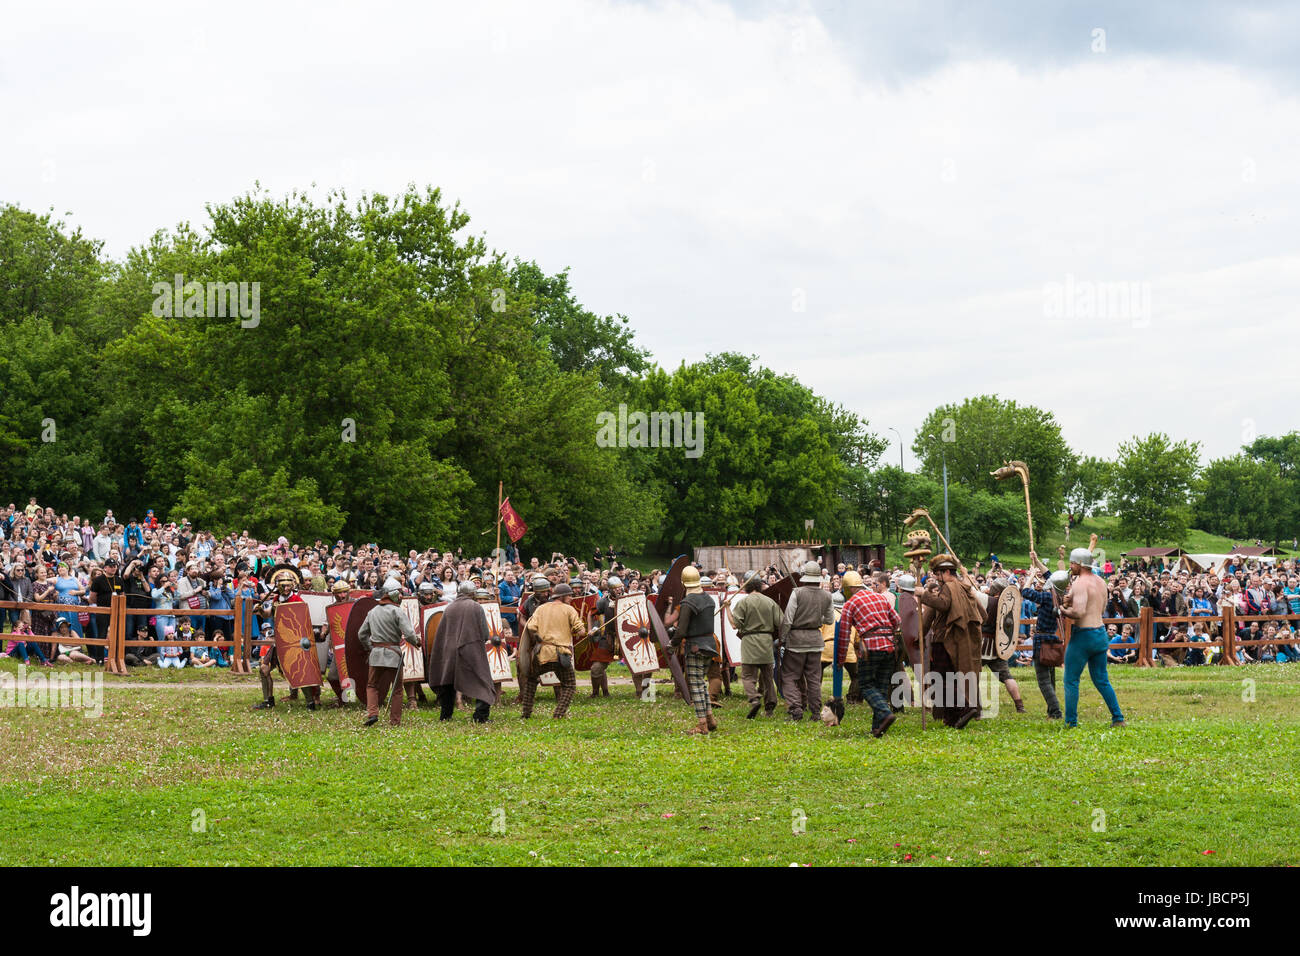 Moscow, Russia. 10th June, 2017. International Times & Epochs history reenactment festival in under way in Moscow. About 6000 reenactors from around the world take part in this 12 day long festival. They represent many history periods from times of ancient Greece and Rome to XX century on more than 15 festival areas all over the city. Ancient Rome period everyday life scenes, gladiator games, battles with Germans and Dacians and other events are presented in Kolomenskoe public park. Teutoburg forest battle. Roman legions fall under German attack. Credit: Alex's Pictures/Alamy Live News Stock Photo